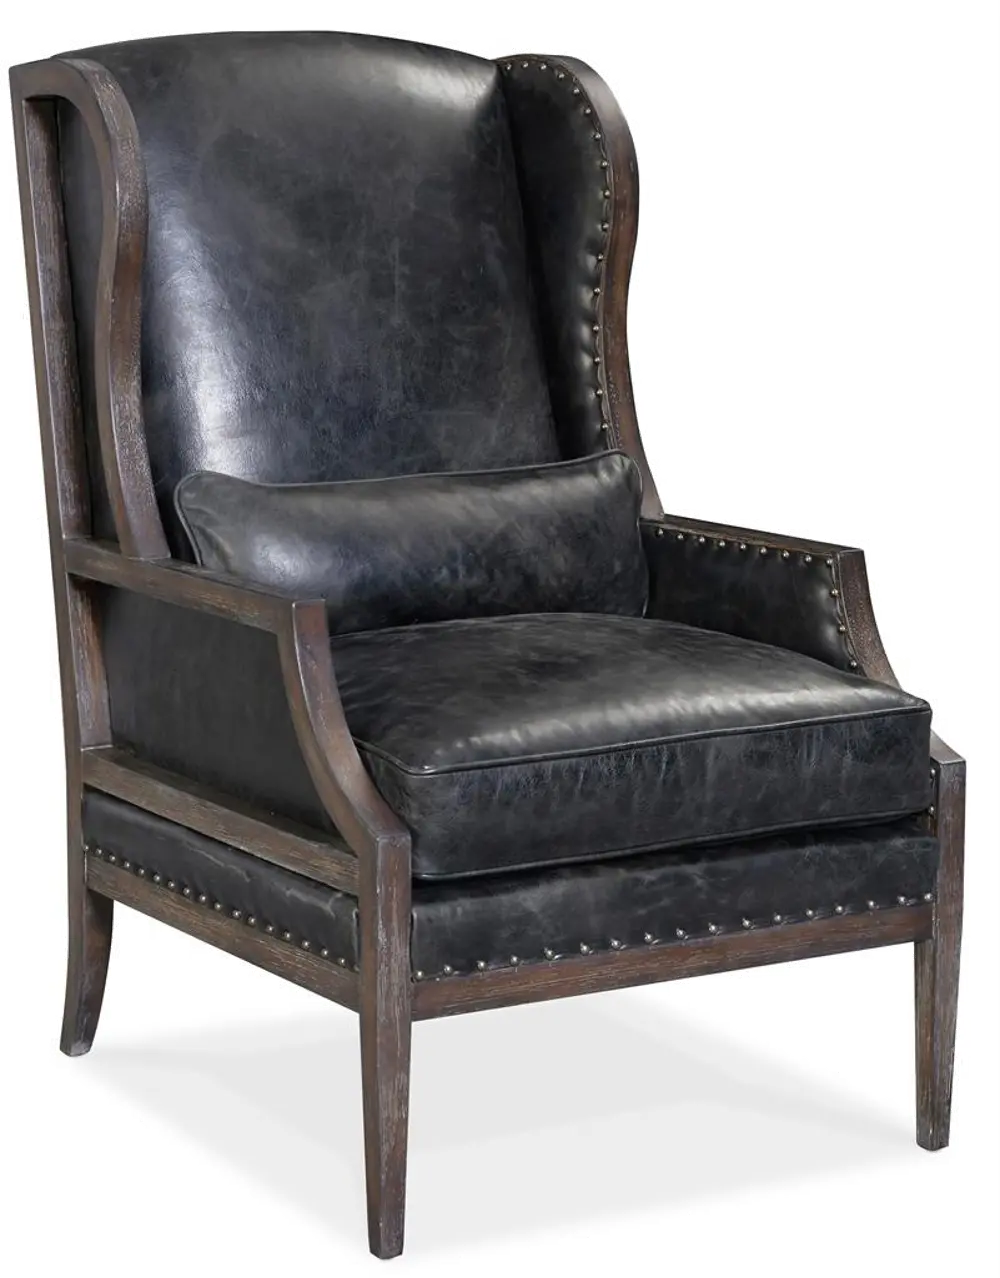 Black Distressed Leather Club Chair with Exposed Wood - Laurel-1